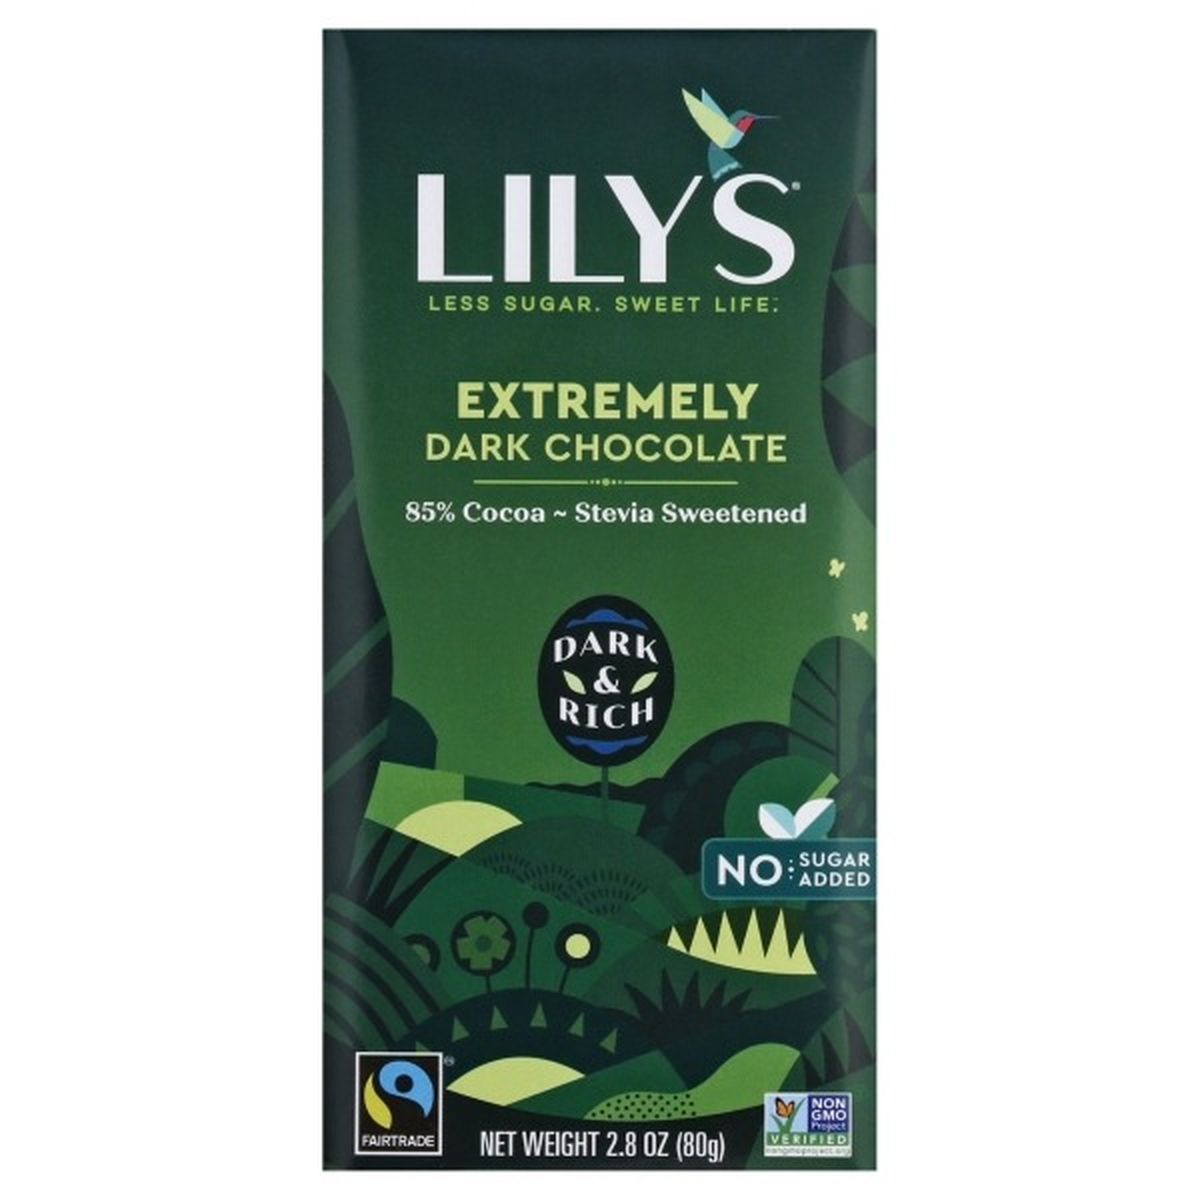 Calories in Lily's Chocolate, Extremely Dark, 85% Cocoa